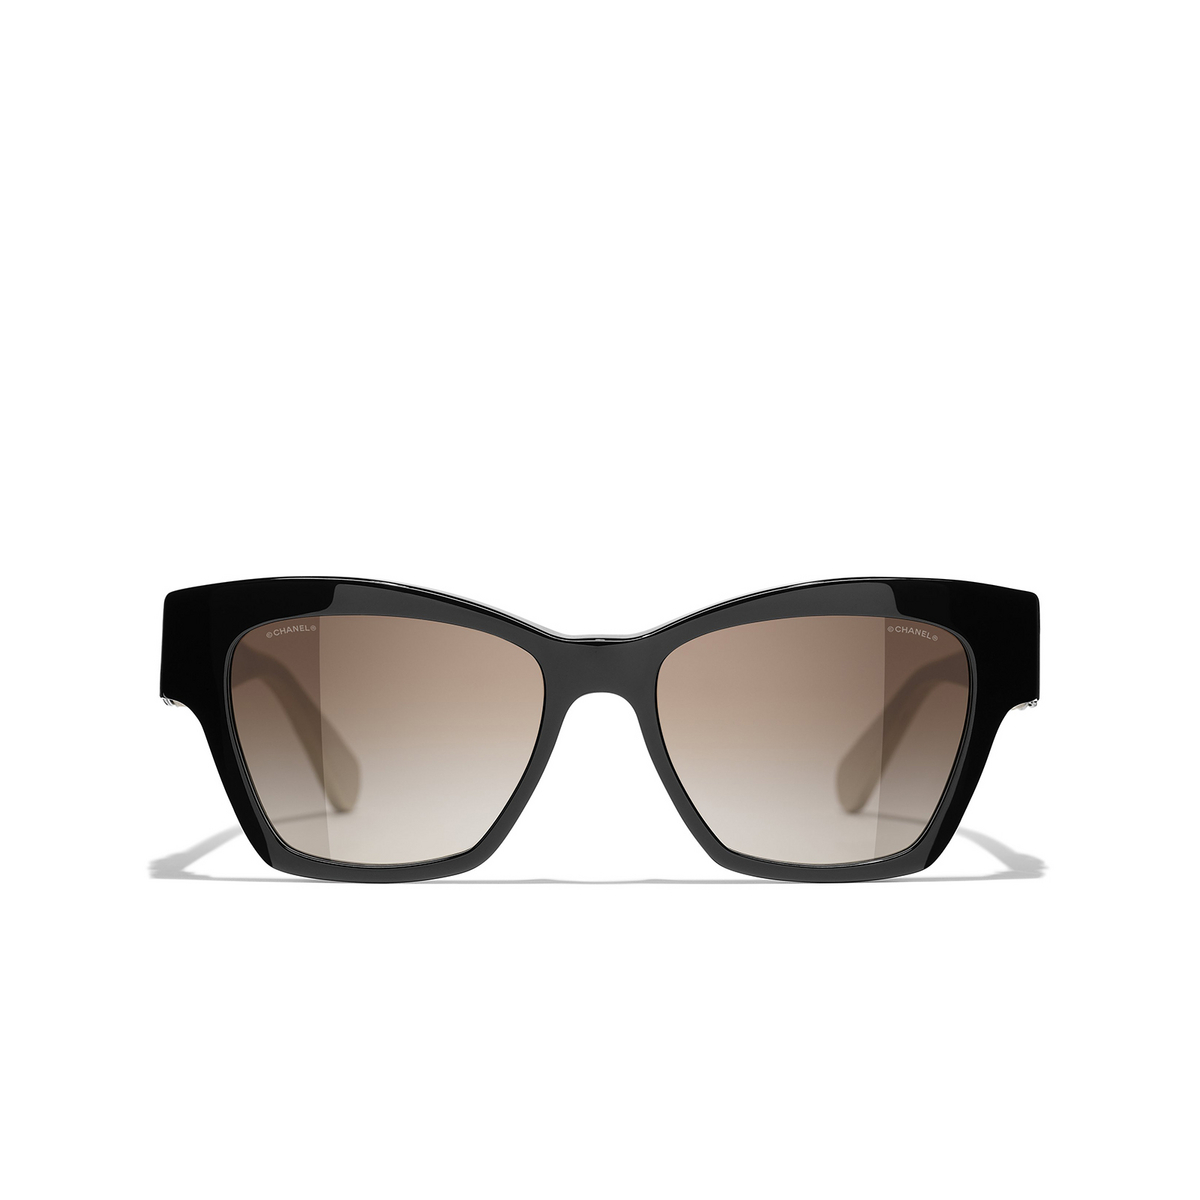 CHANEL butterfly Sunglasses C501S5 Black - front view